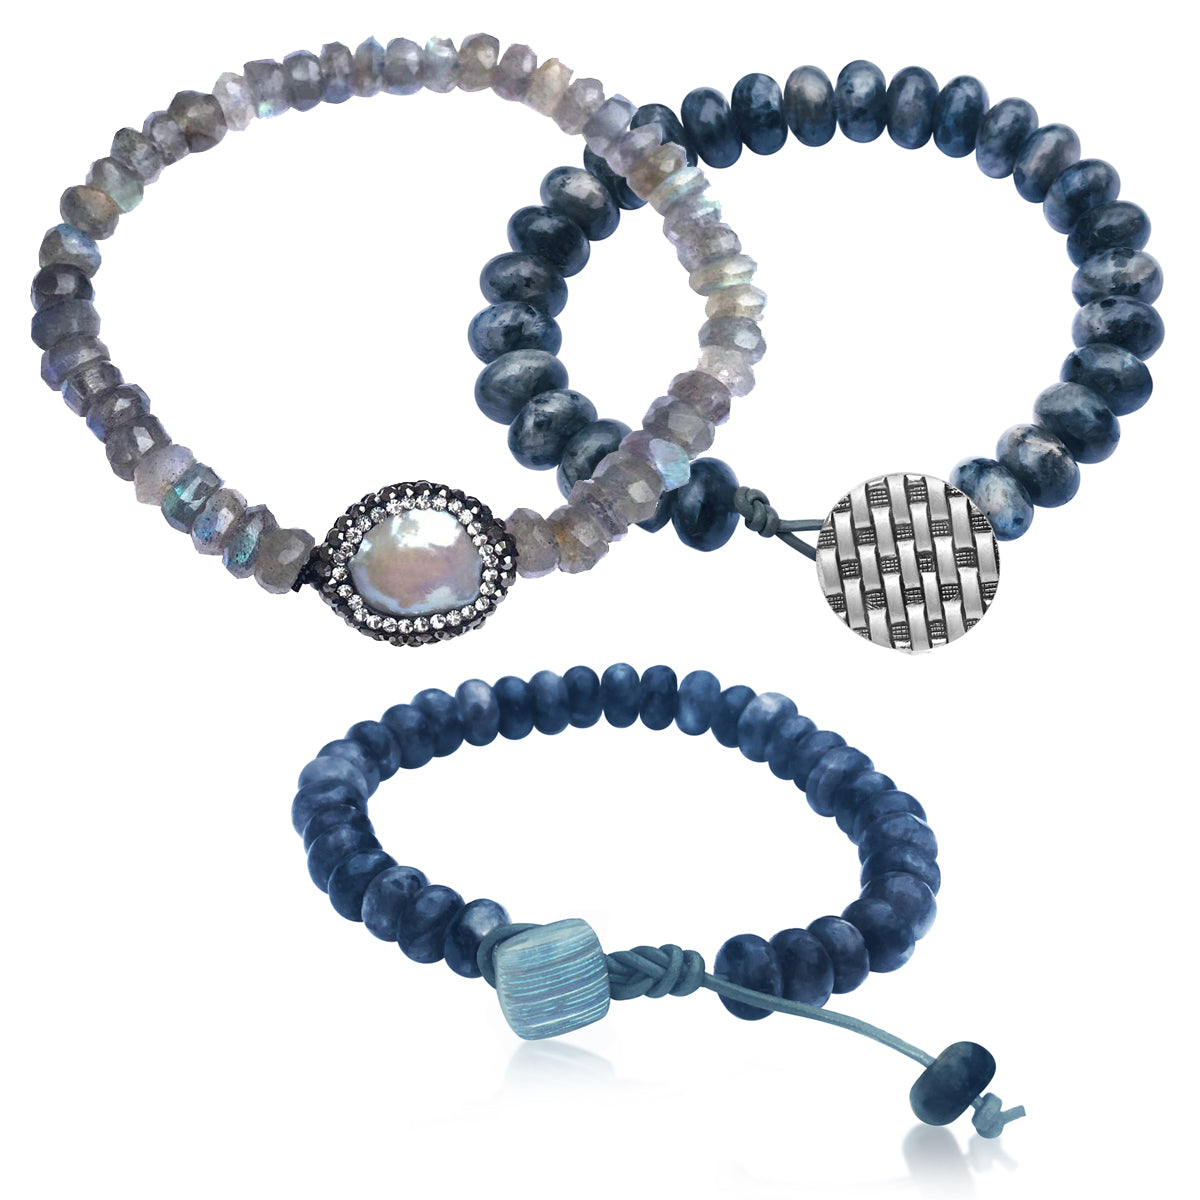 Labradorite Crystal Bracelet Trio for a Positive Change in Your Life